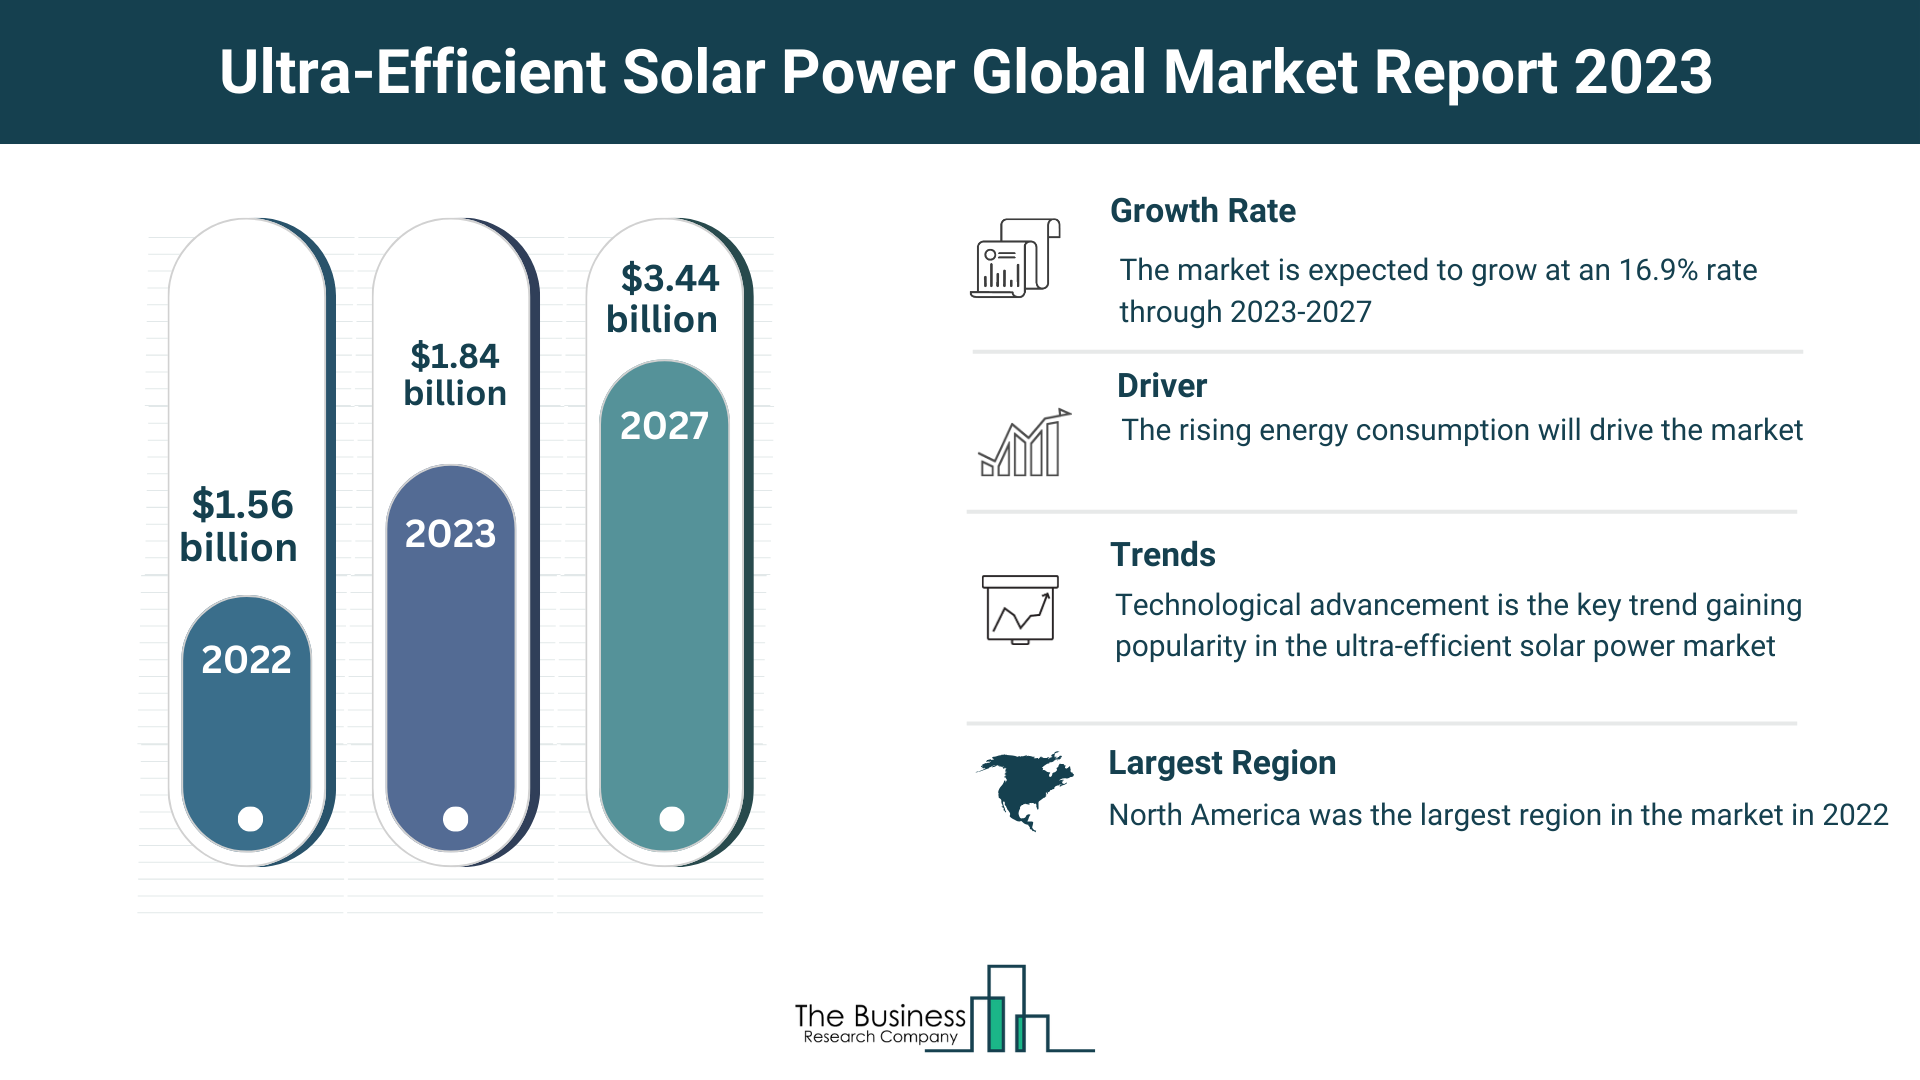 How Is the Ultra-Efficient Solar Power Market Expected To Grow Through 2023-2032?